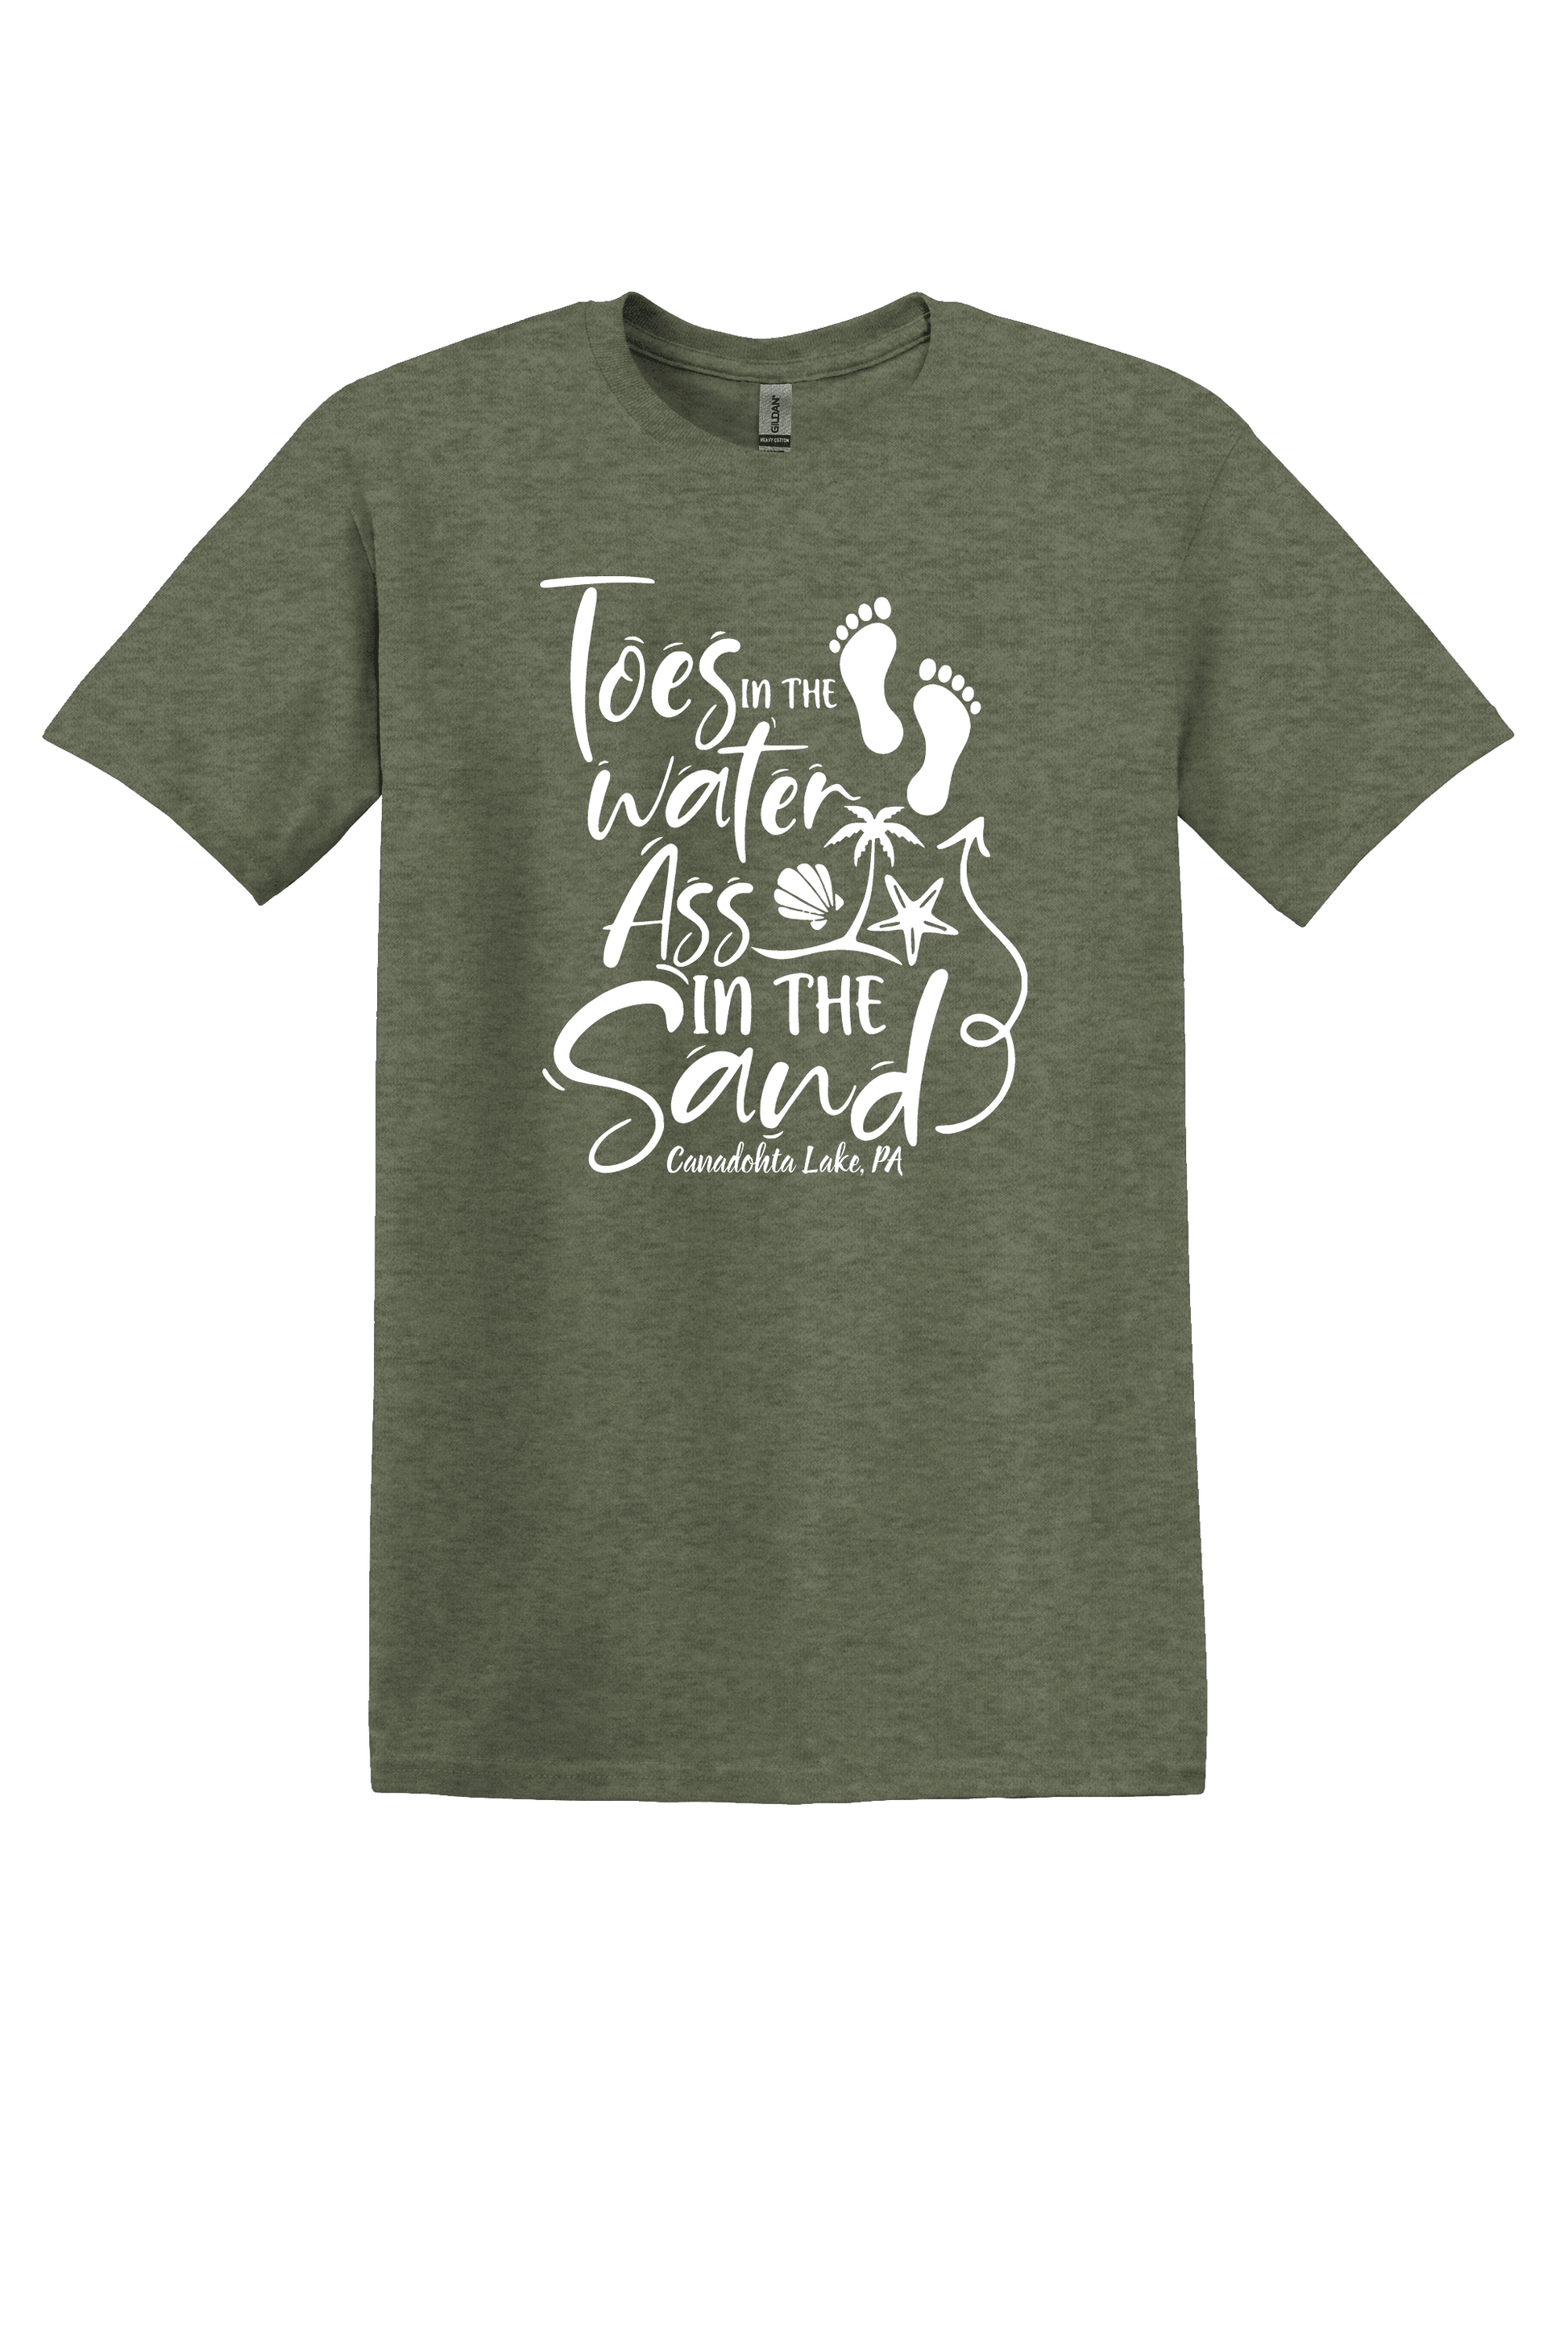 Toe's in the water, Ass in the Sand Canadohta Lake, PA Tshirt - Canadohta Custom Creations LLC